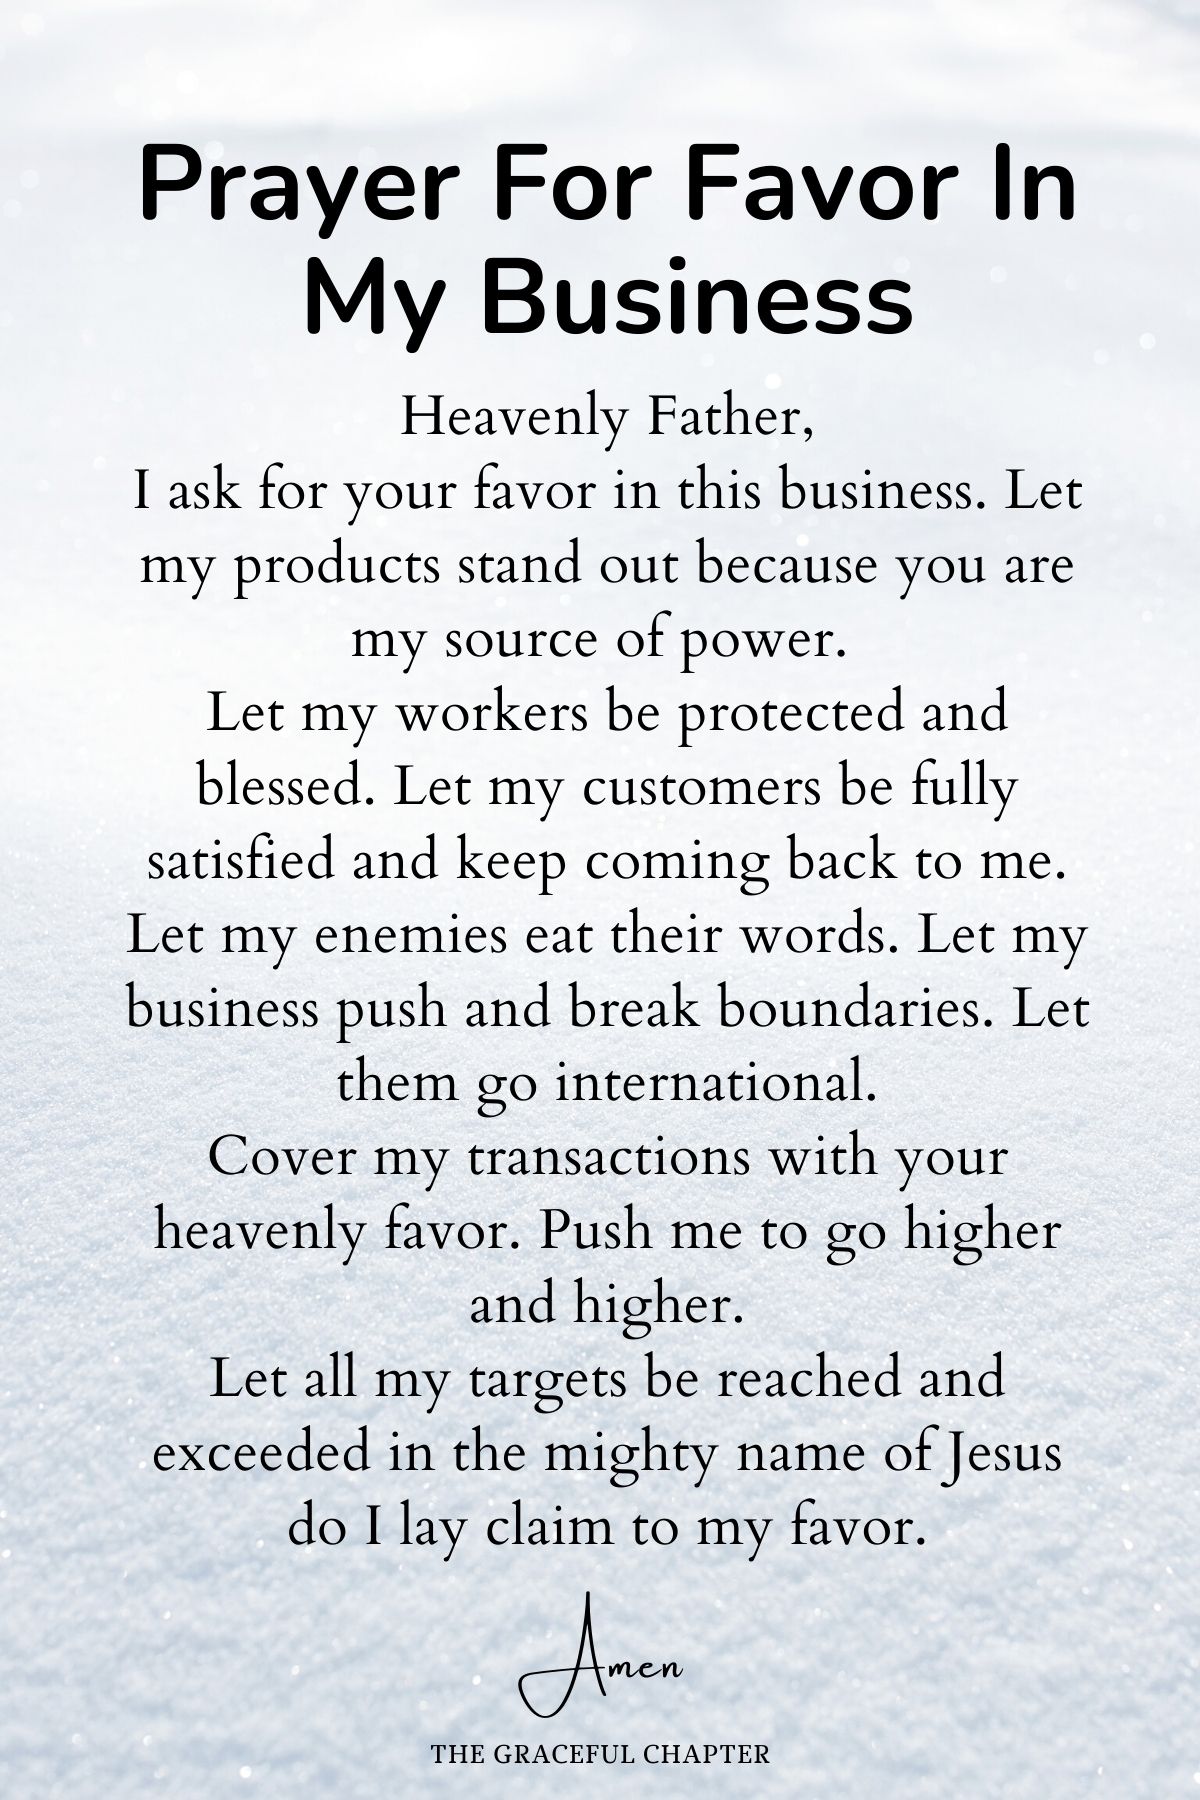 Prayer for favor in my business